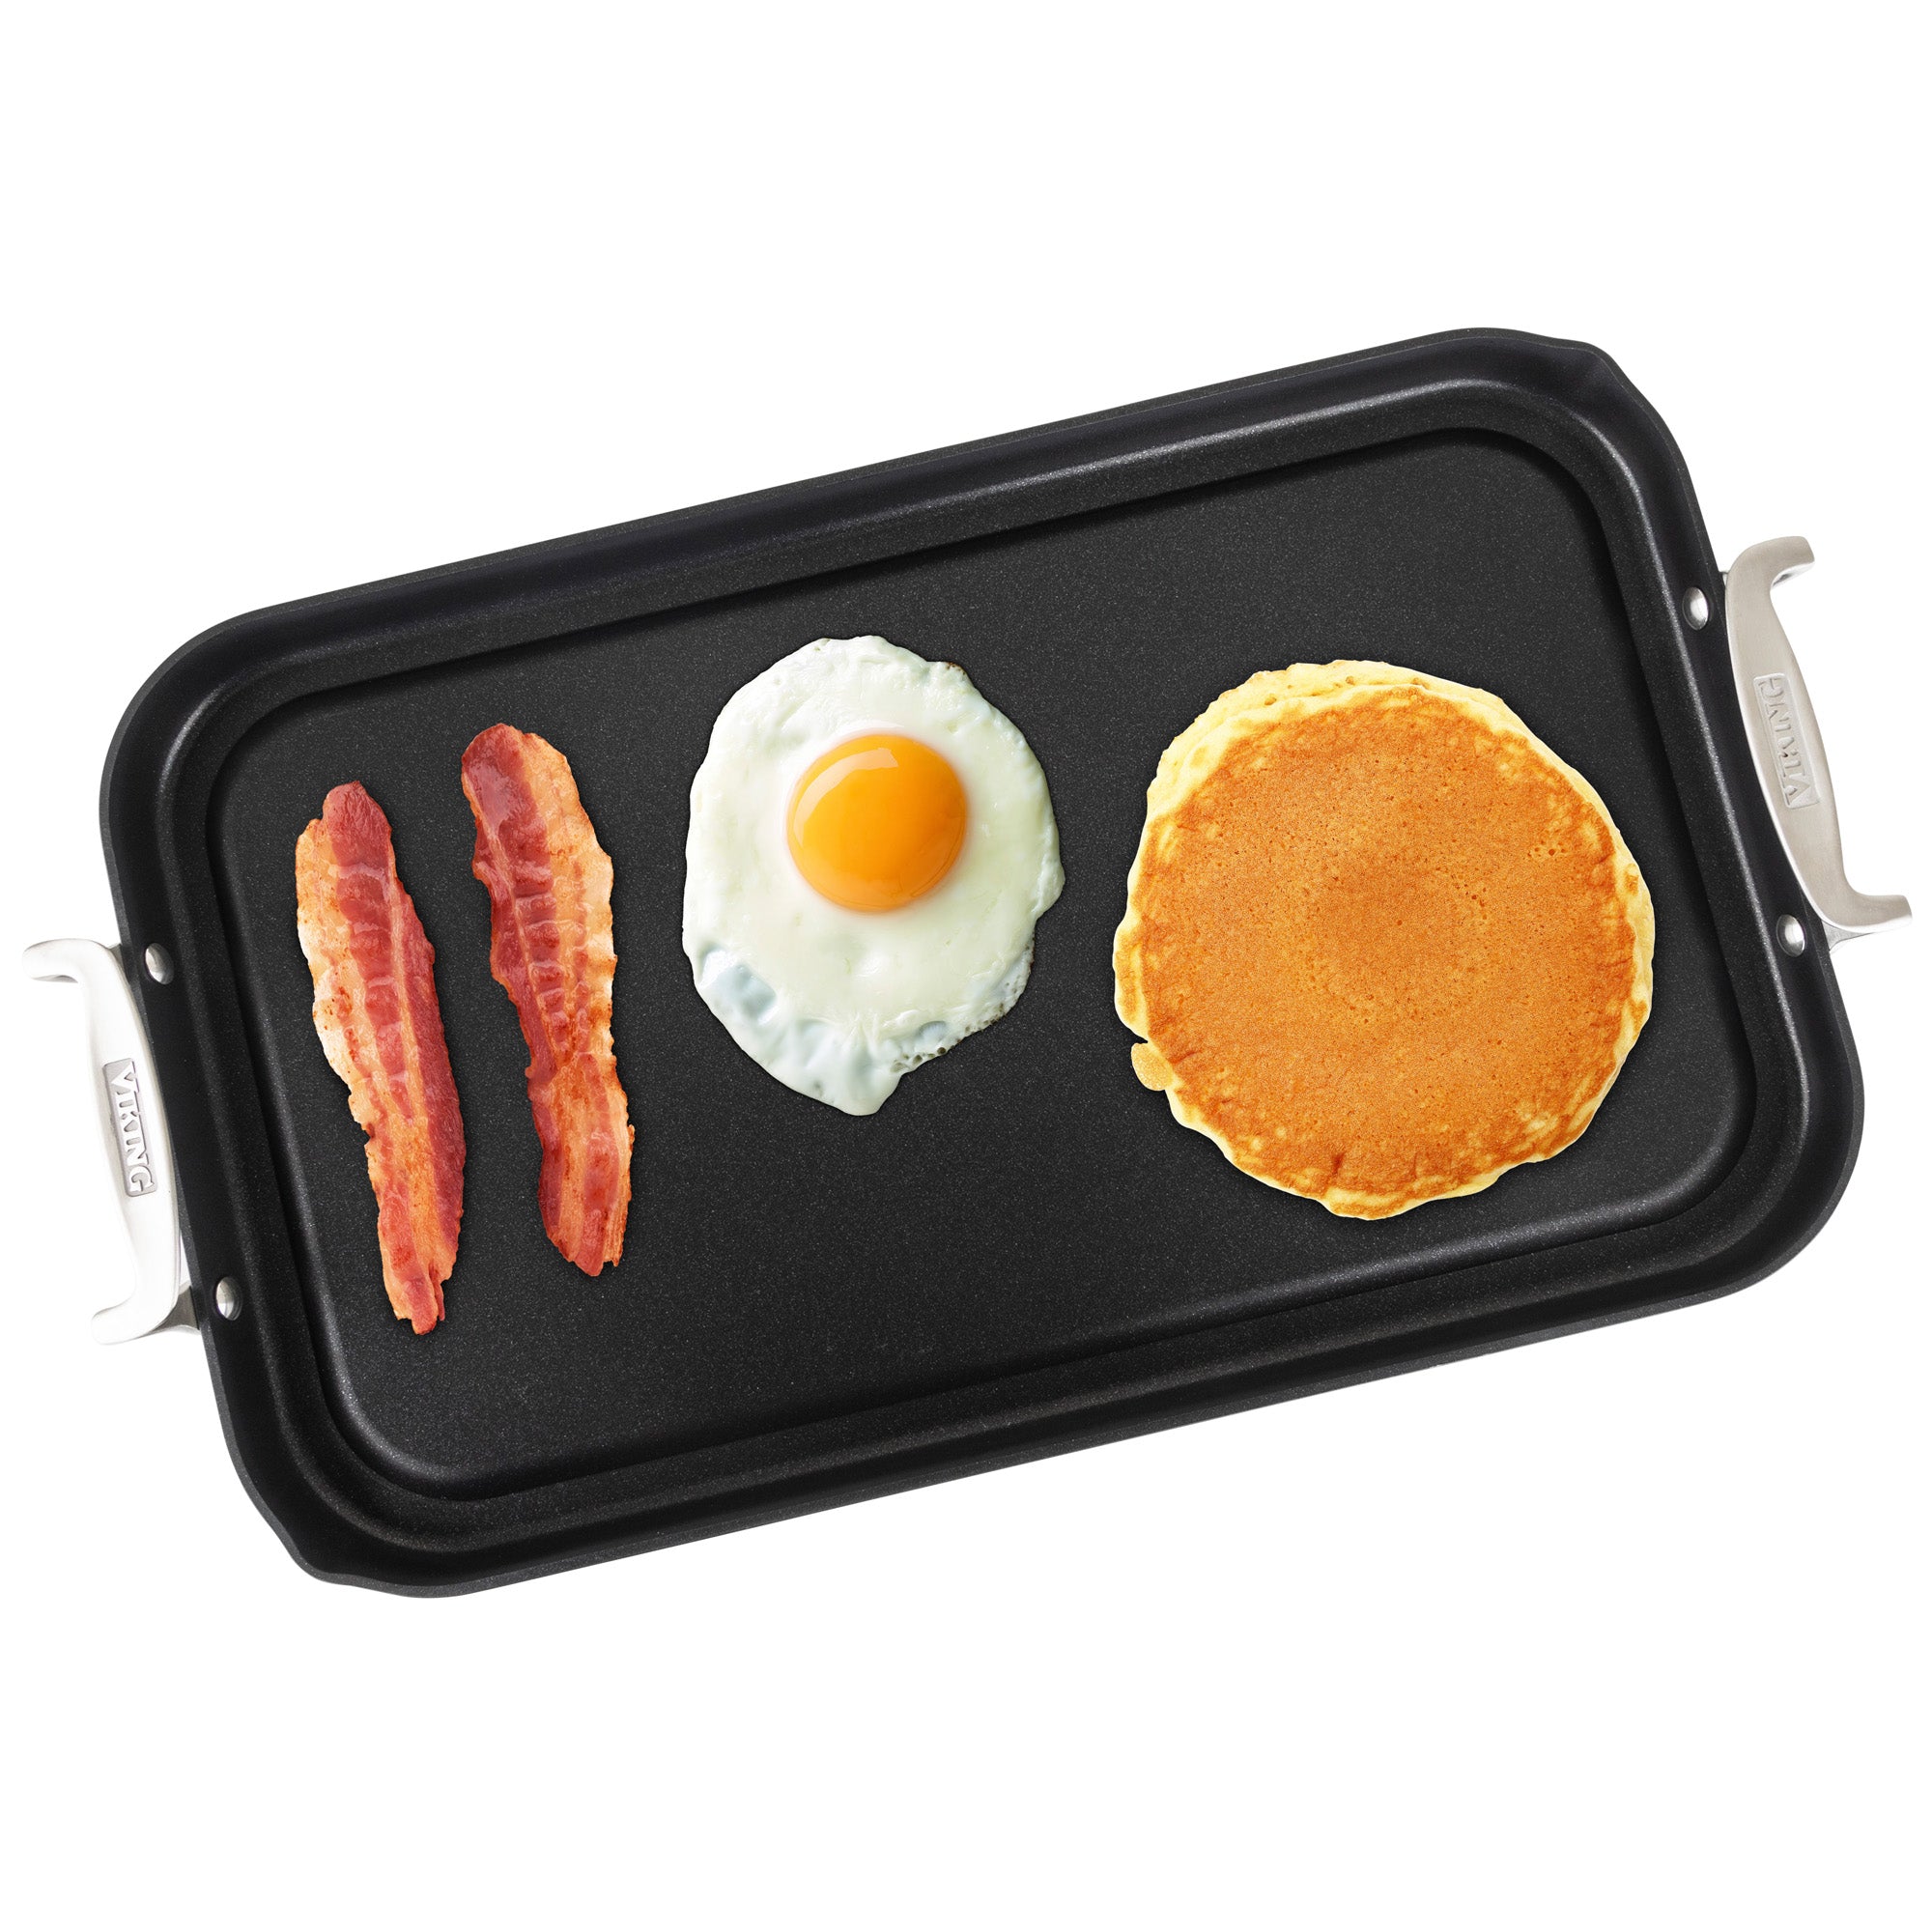 All-Clad HA1 Hard Anodized Nonstick Double Burner Griddle